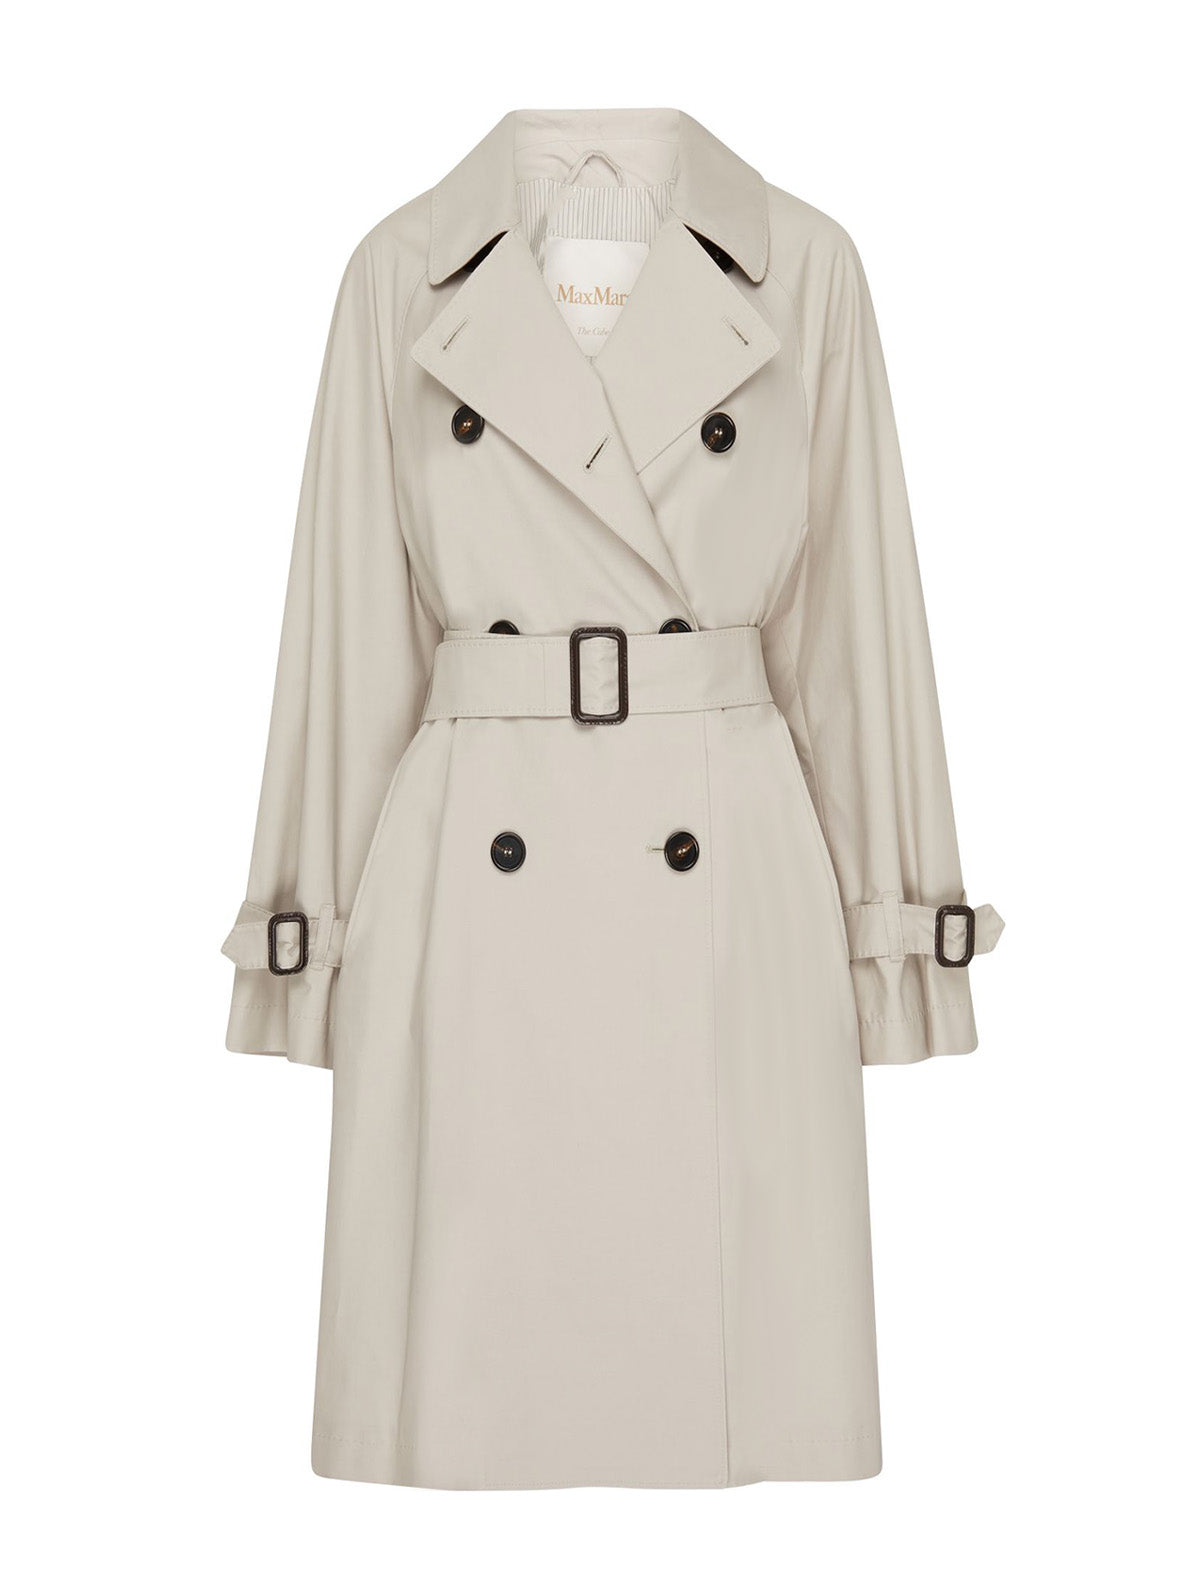 Distressed cotton trench coat with belt at the waist